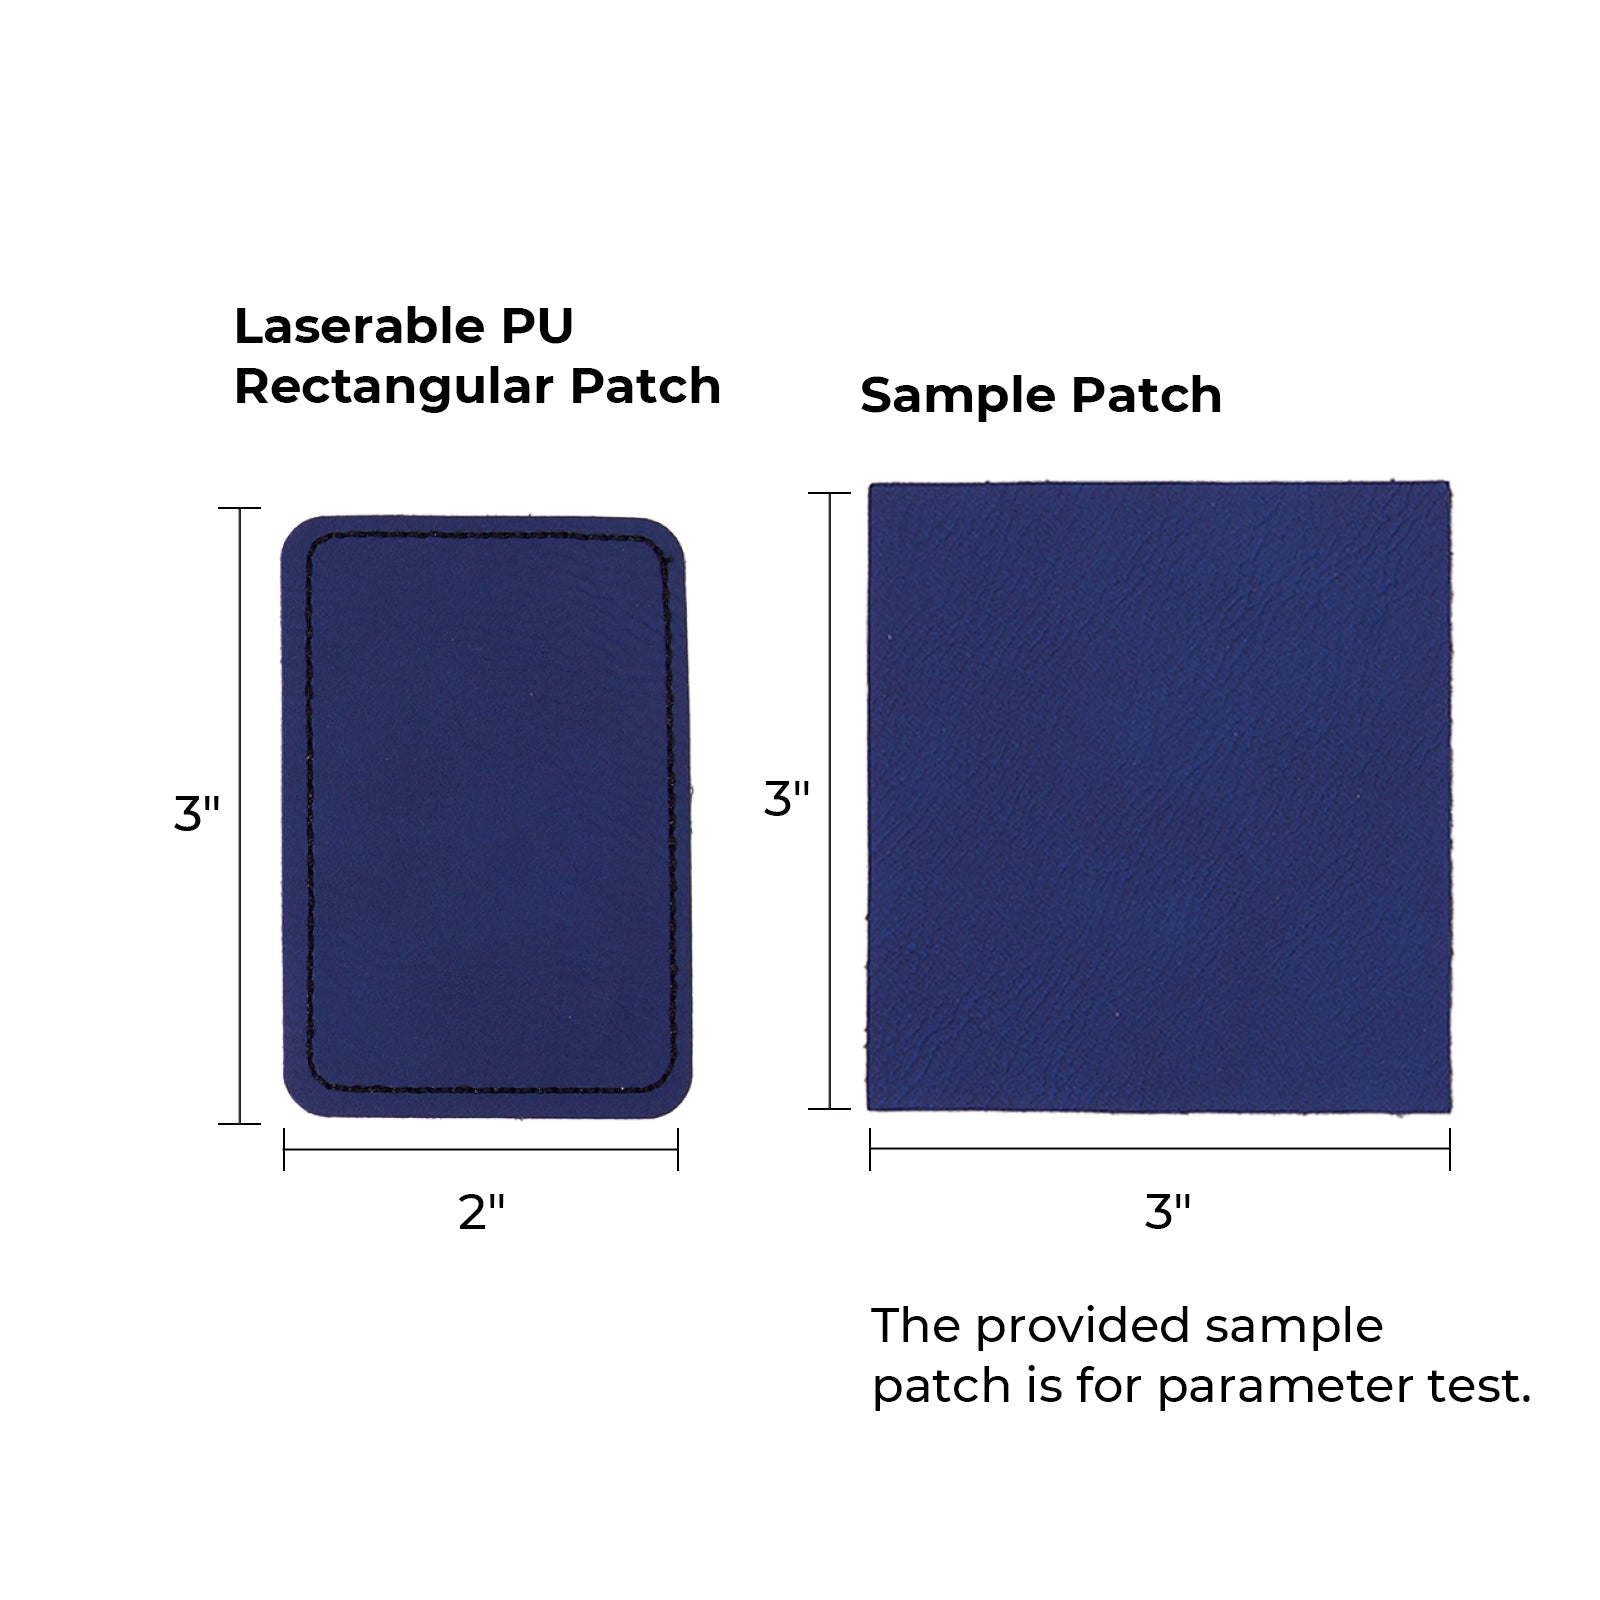 Blue to Silver Laserable PU Rectangular Patch (10pcs)